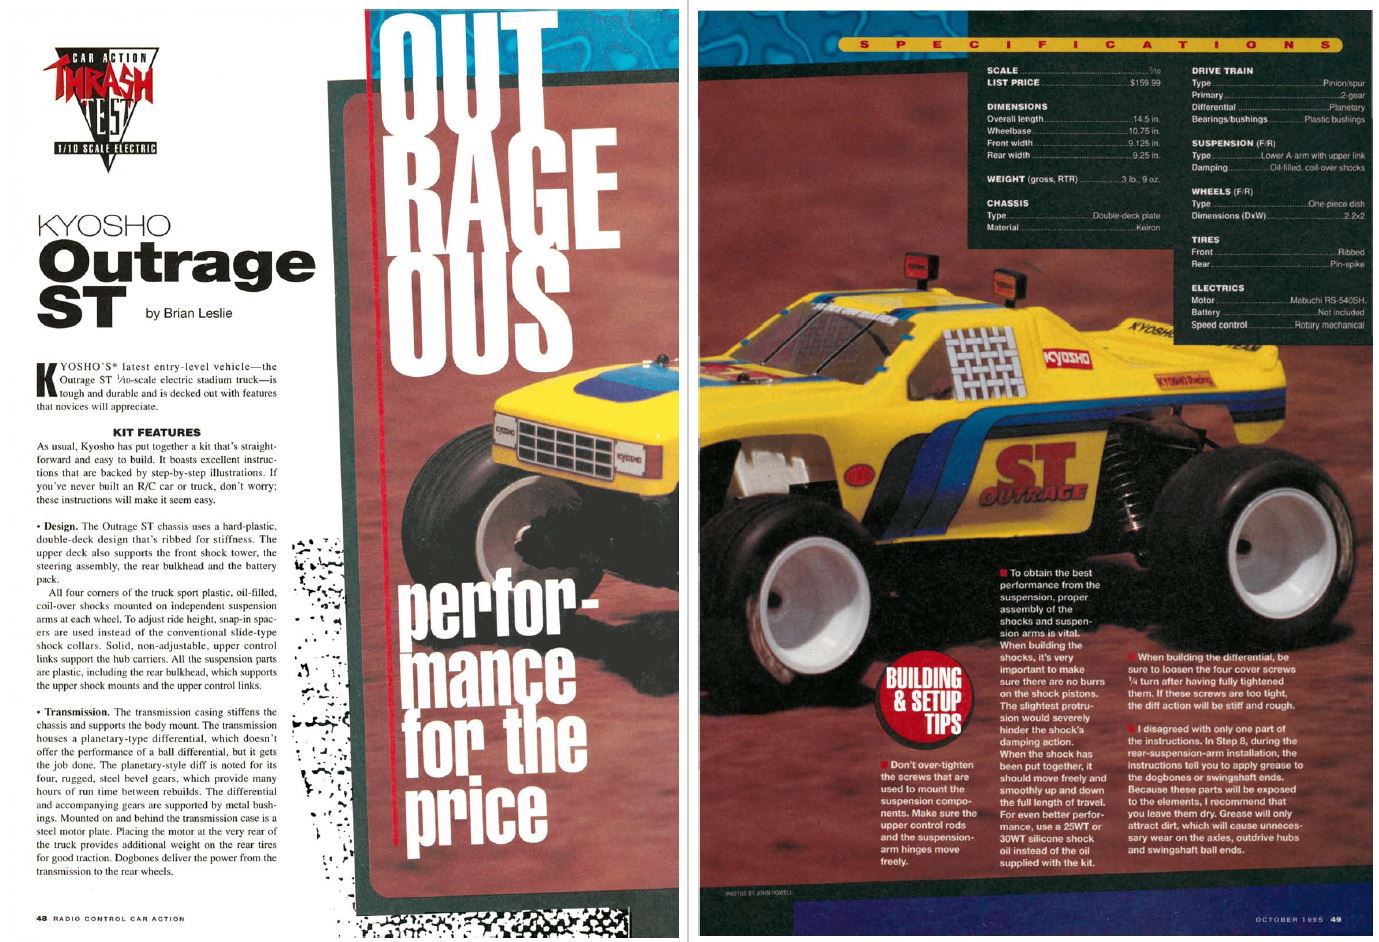 RC Car Action - RC Cars & Trucks | #TBT Kyosho Outrage stadium truck reviewed in October 1995 issue